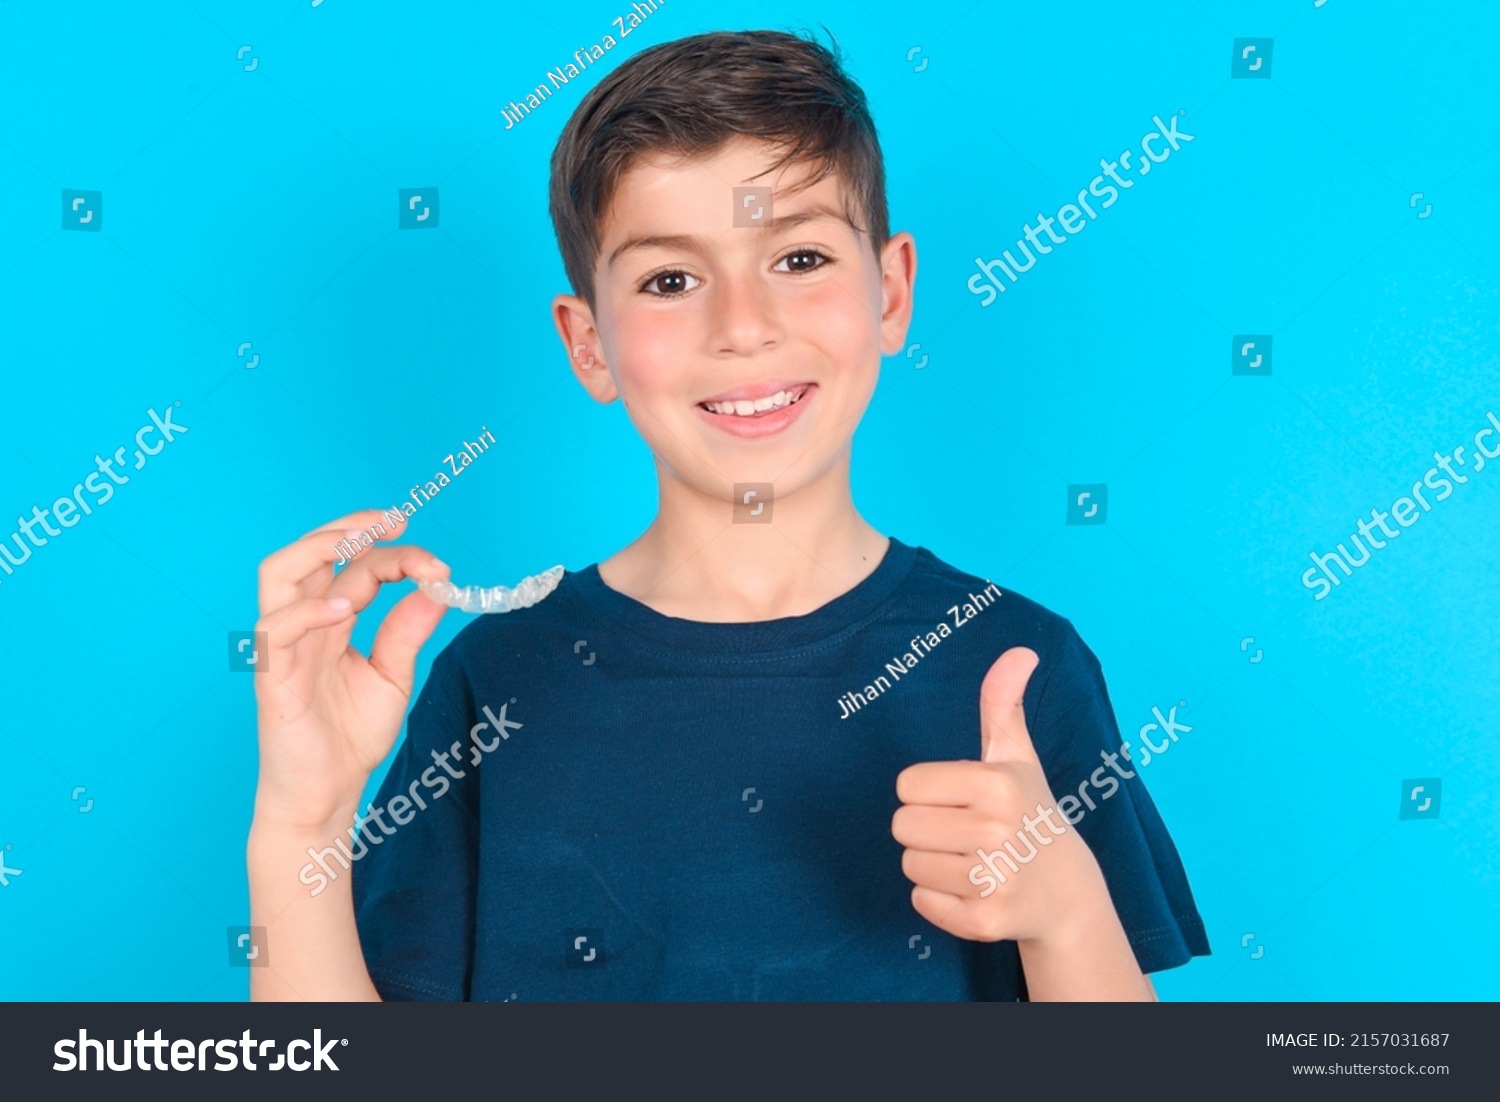 caucasian kid boy wearing blue T-shirt over blue background holding an invisible braces aligner and rising thumb up, recommending this new treatment. Dental healthcare concept. #2157031687